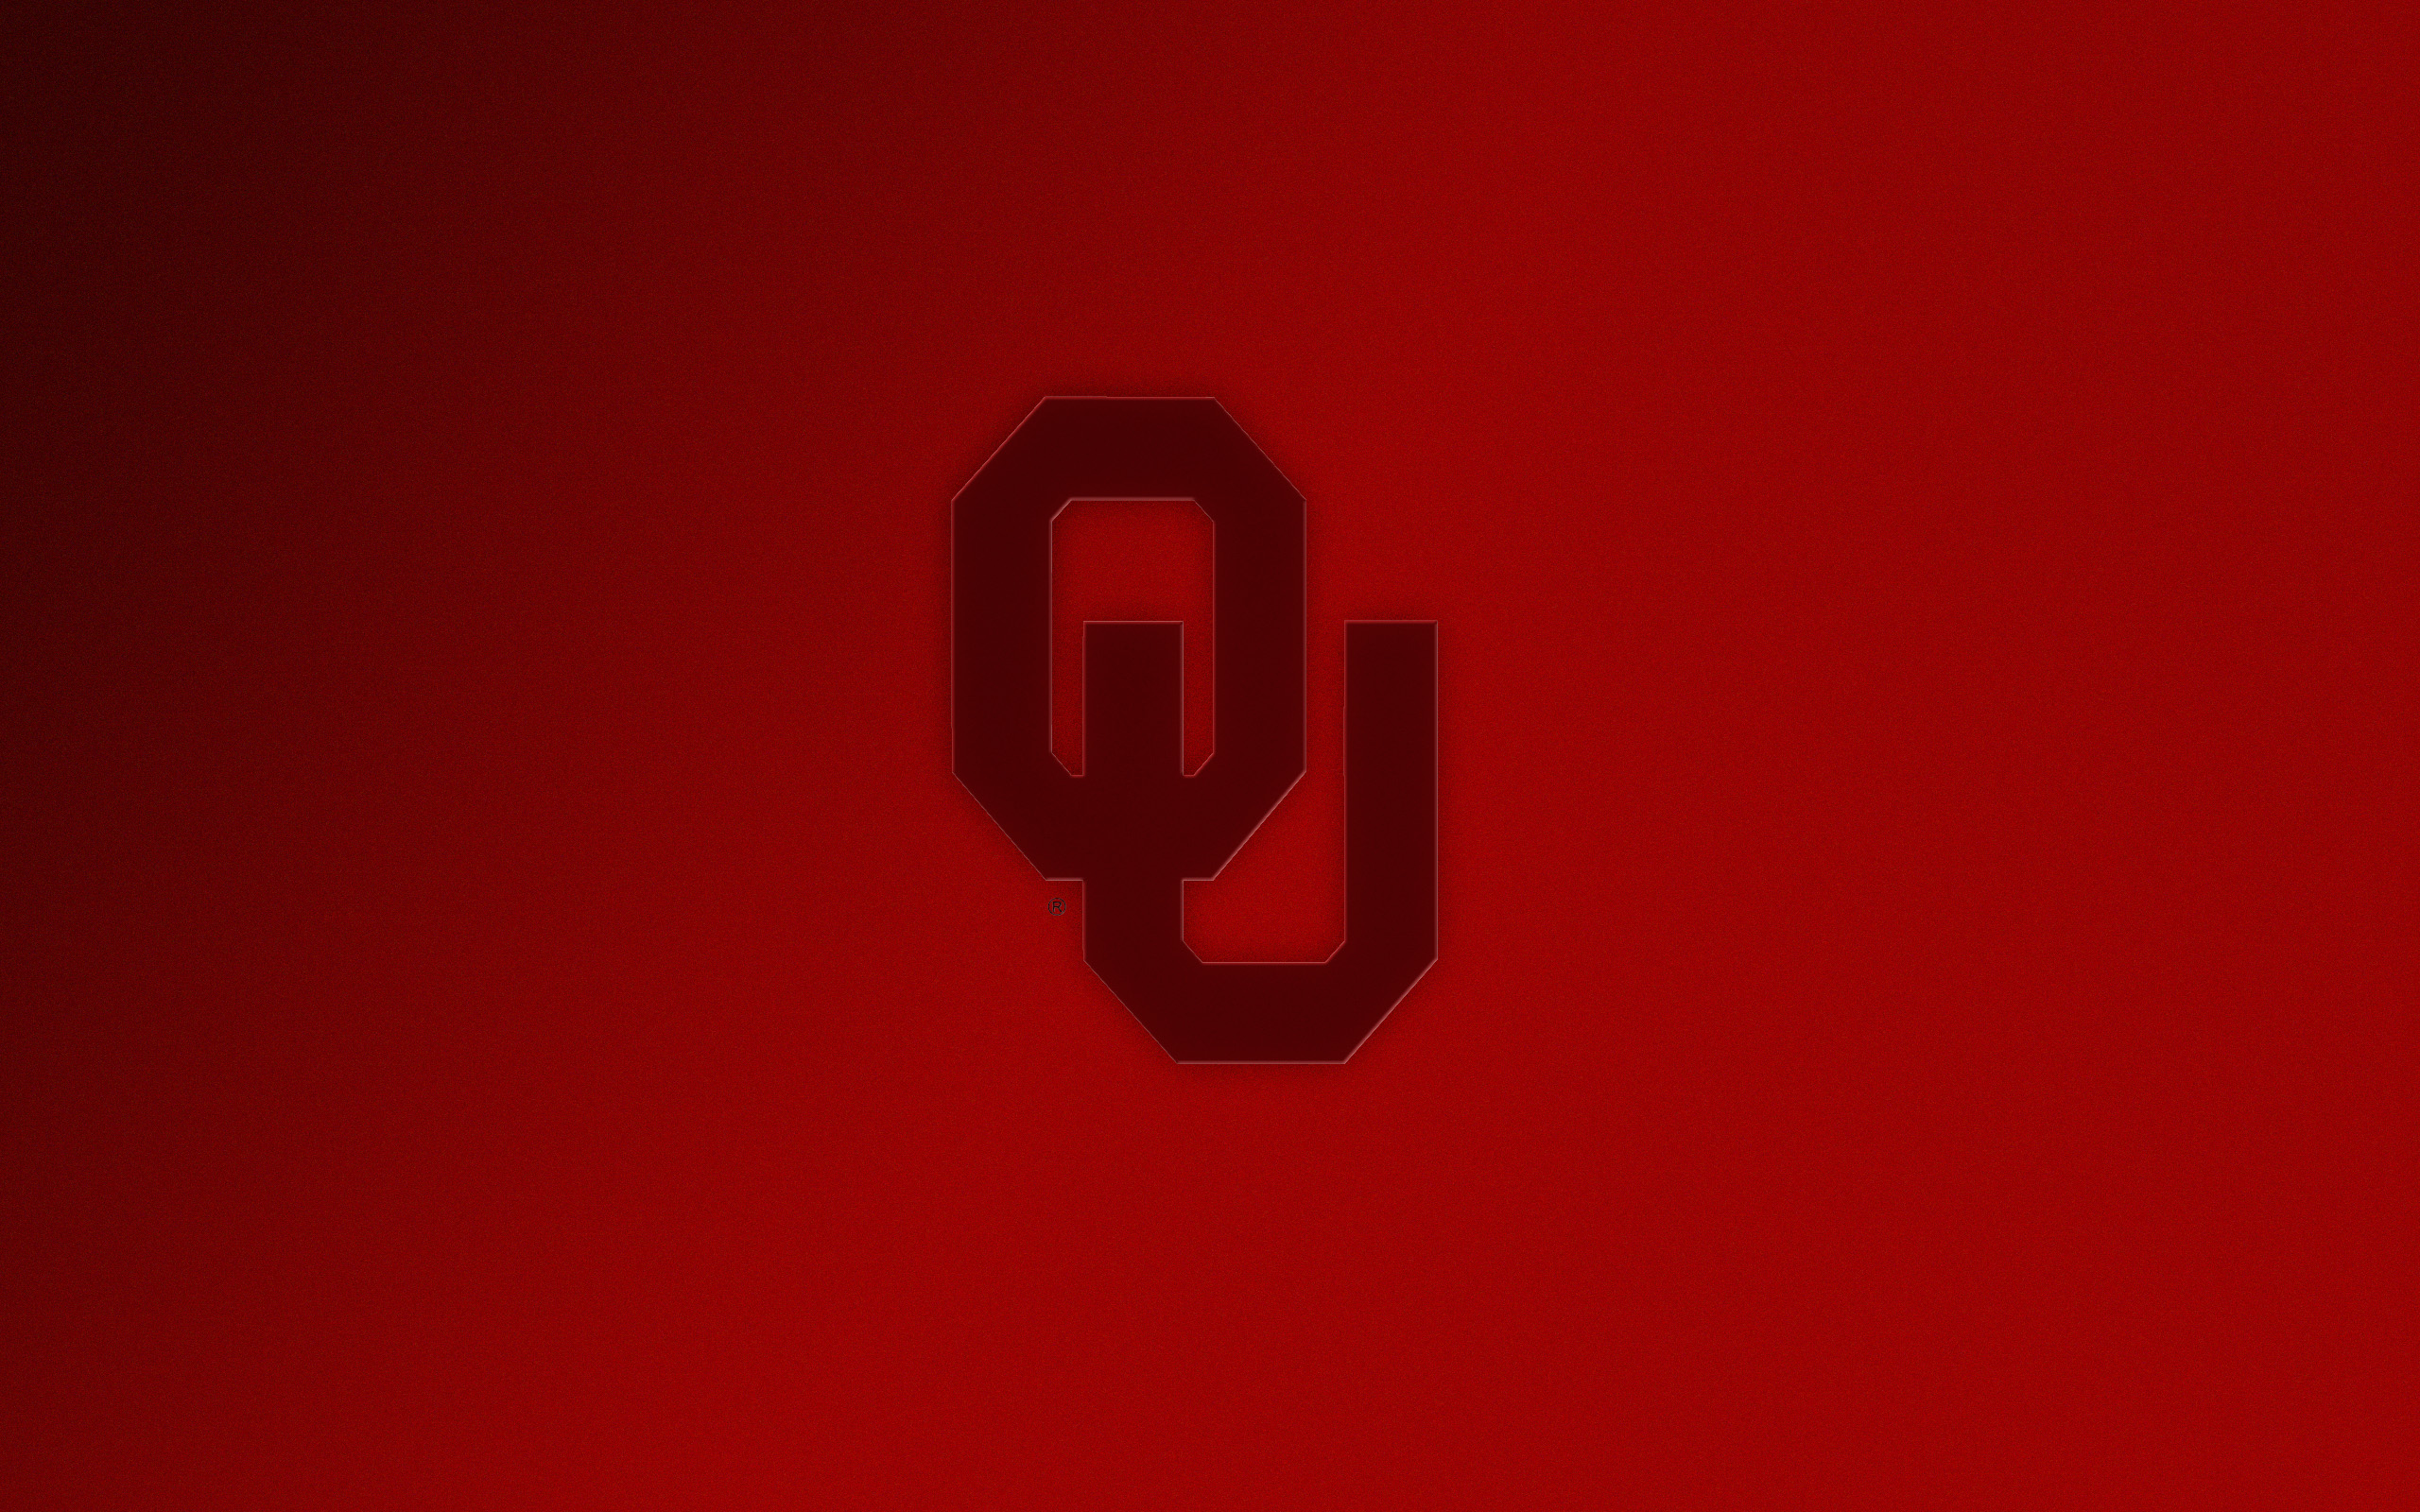  com University of Oklahoma Themed Wallpapers for Download 2560x1600